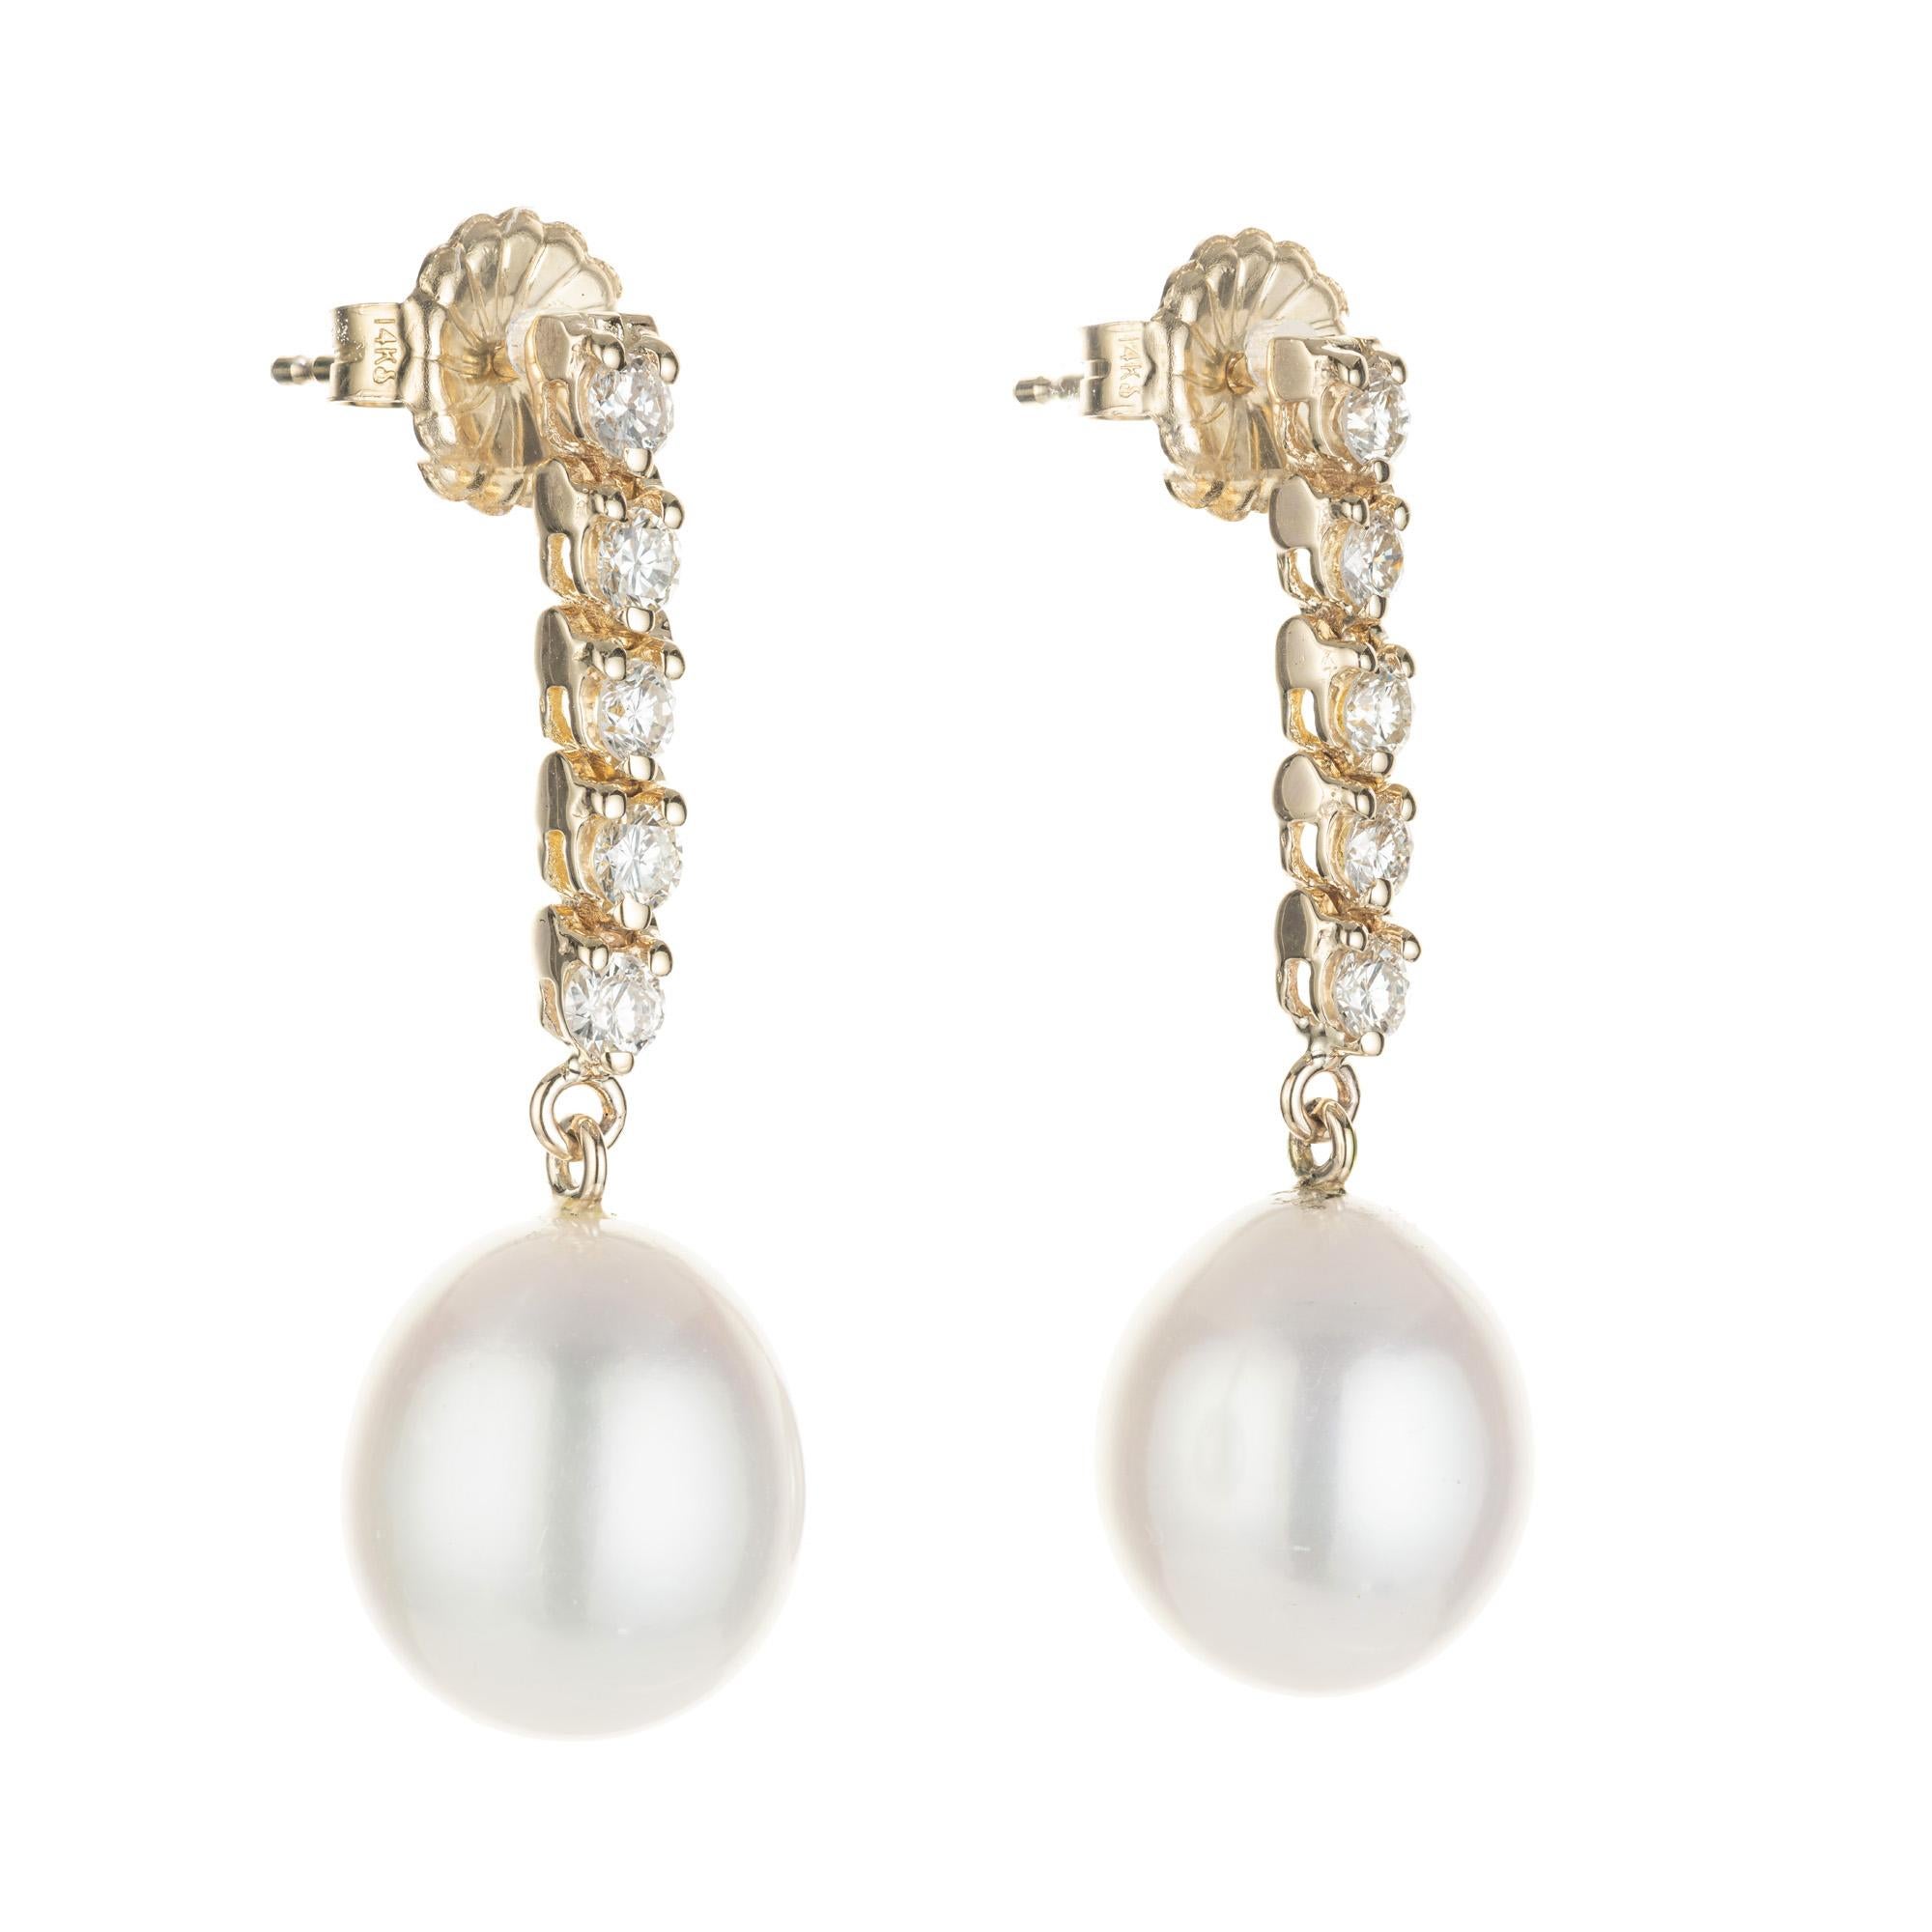 Freshwater and diamond dangle drop earrings. Two 11mm to 11.5mm freshwater pearls, each dangling from 5 round brilliant cut diamonds in 14k yellow gold.  Designed and crafted in the Peter Suchy Workshop. 

2 freshwater white pearls, 11mm -11.5mm
10